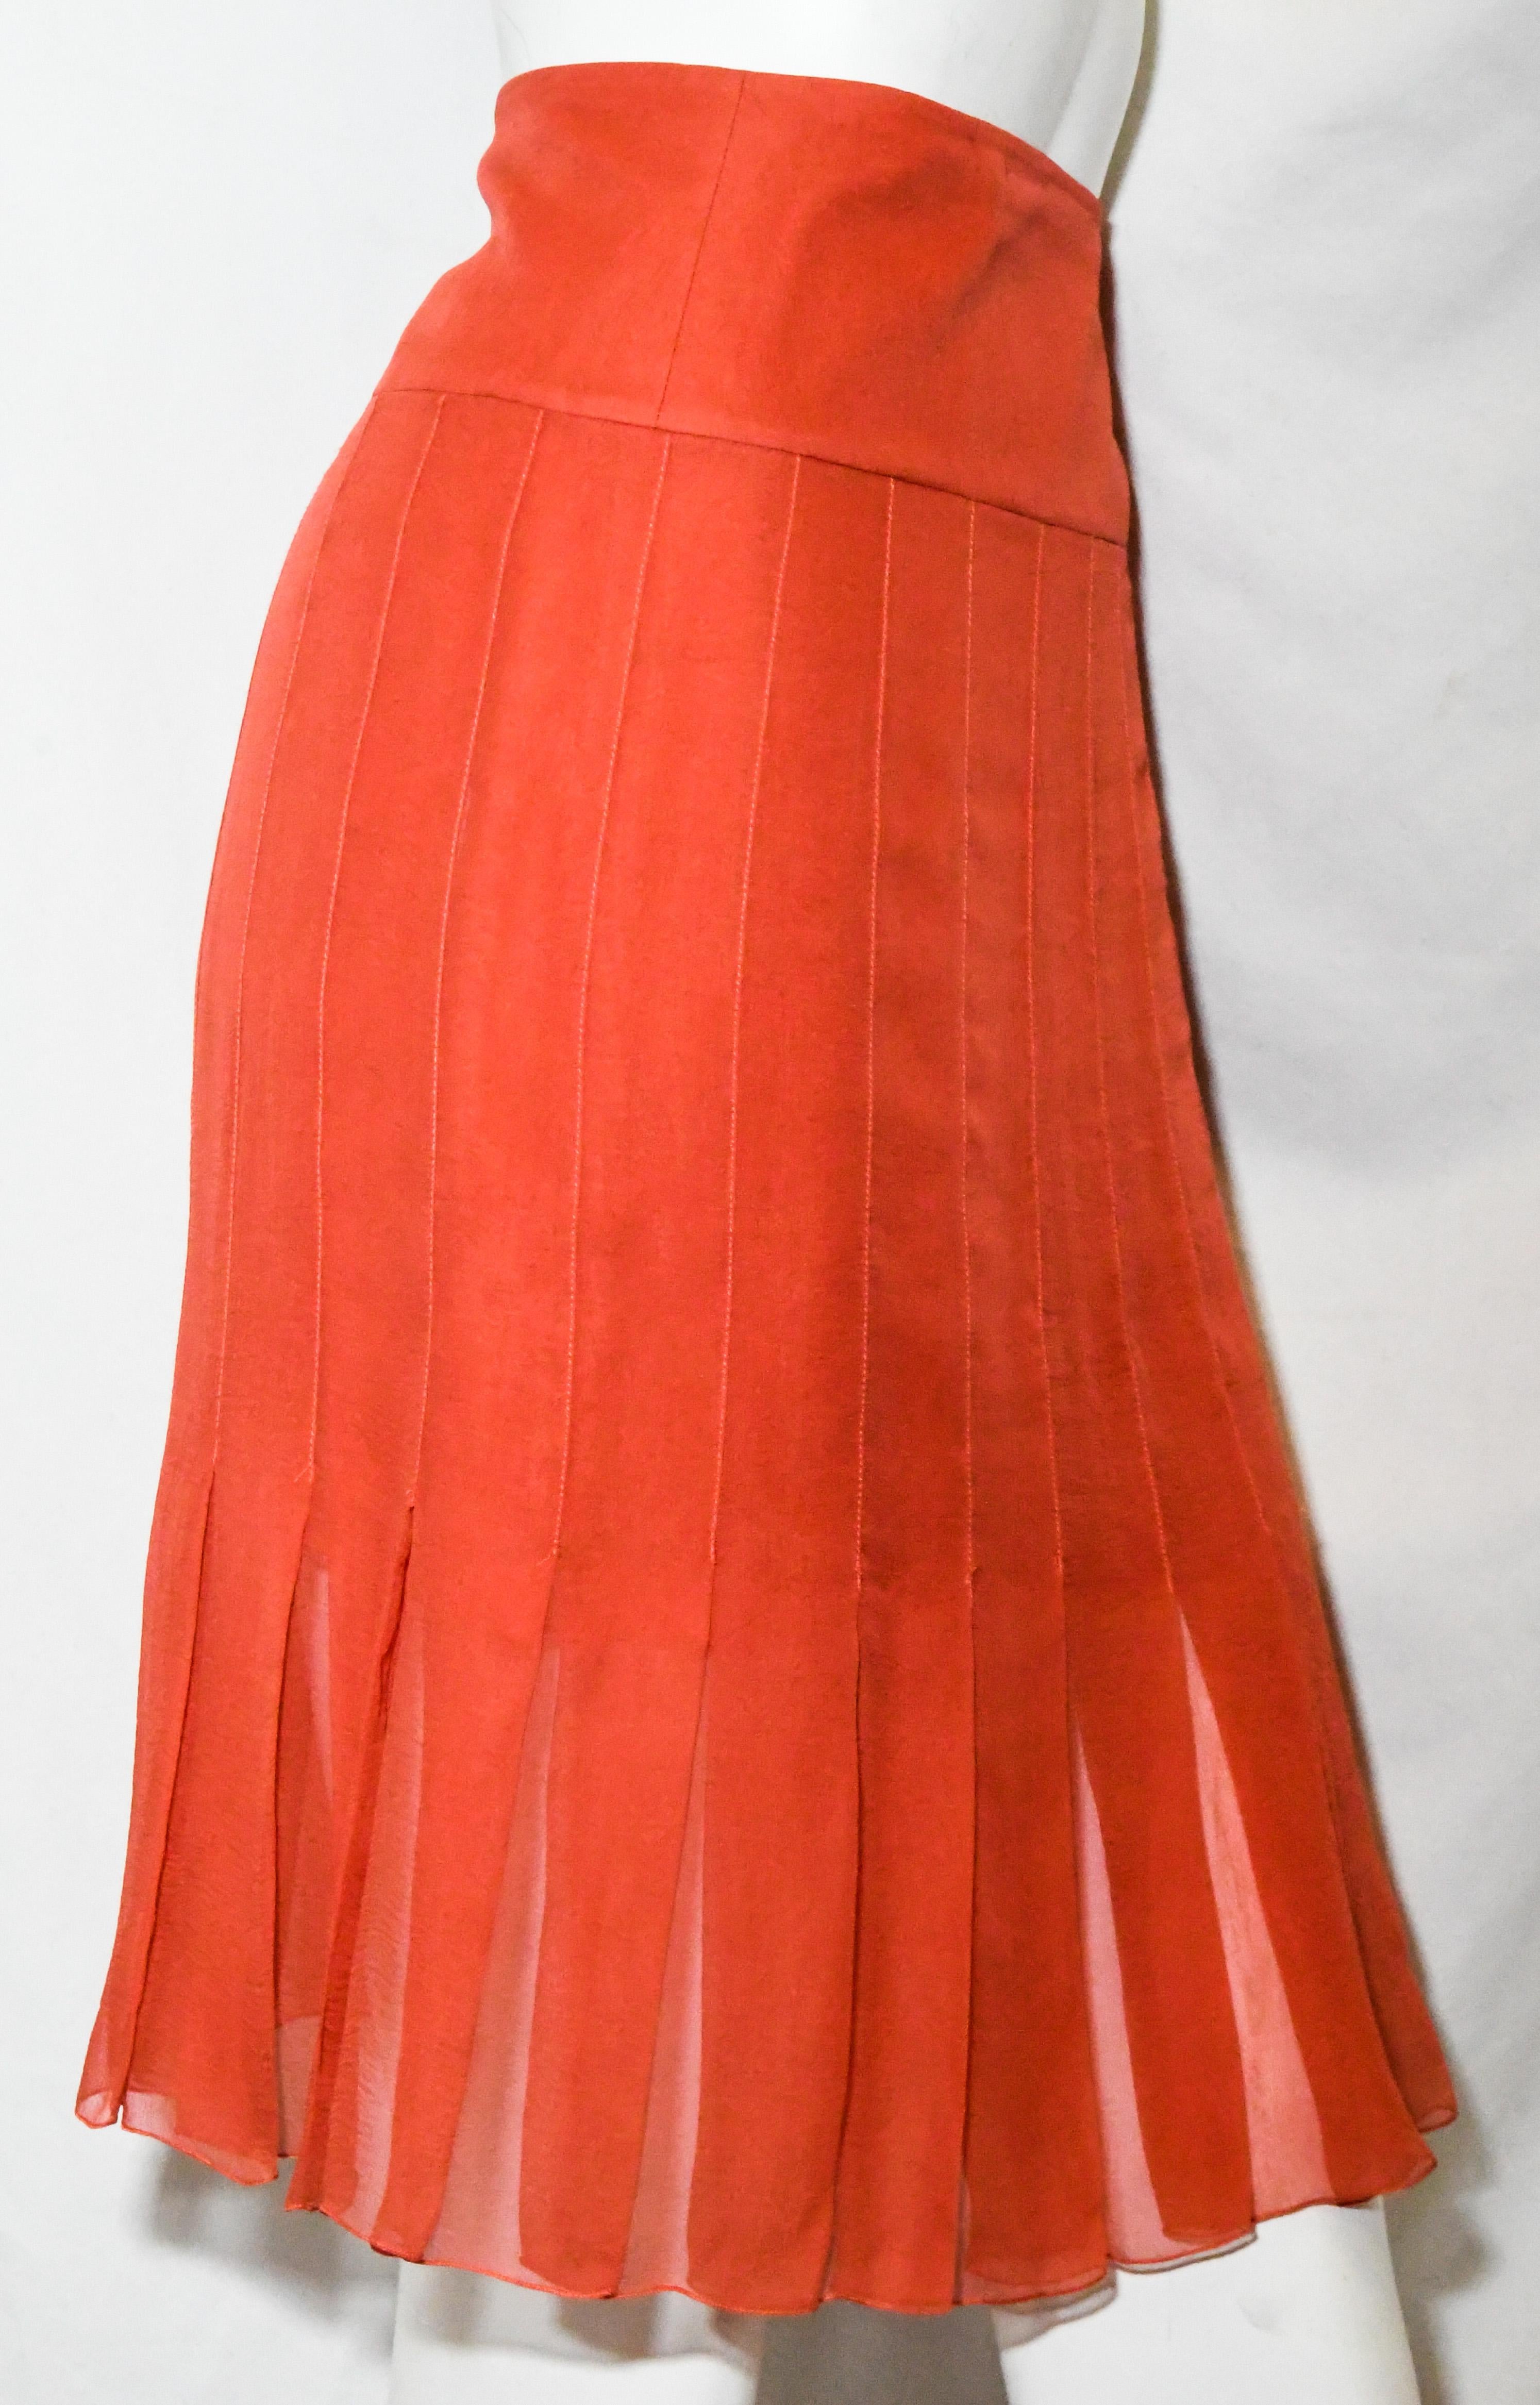 Chanel orange silk sheer chiffon pleated skirt lined to above  the knee with unlined pleats, at the hem.   Orange pleated silk skirt from the 04 spring collection. Wide waistband with three logo Chanel CC buttons closure.   Skirt lined in pink semi